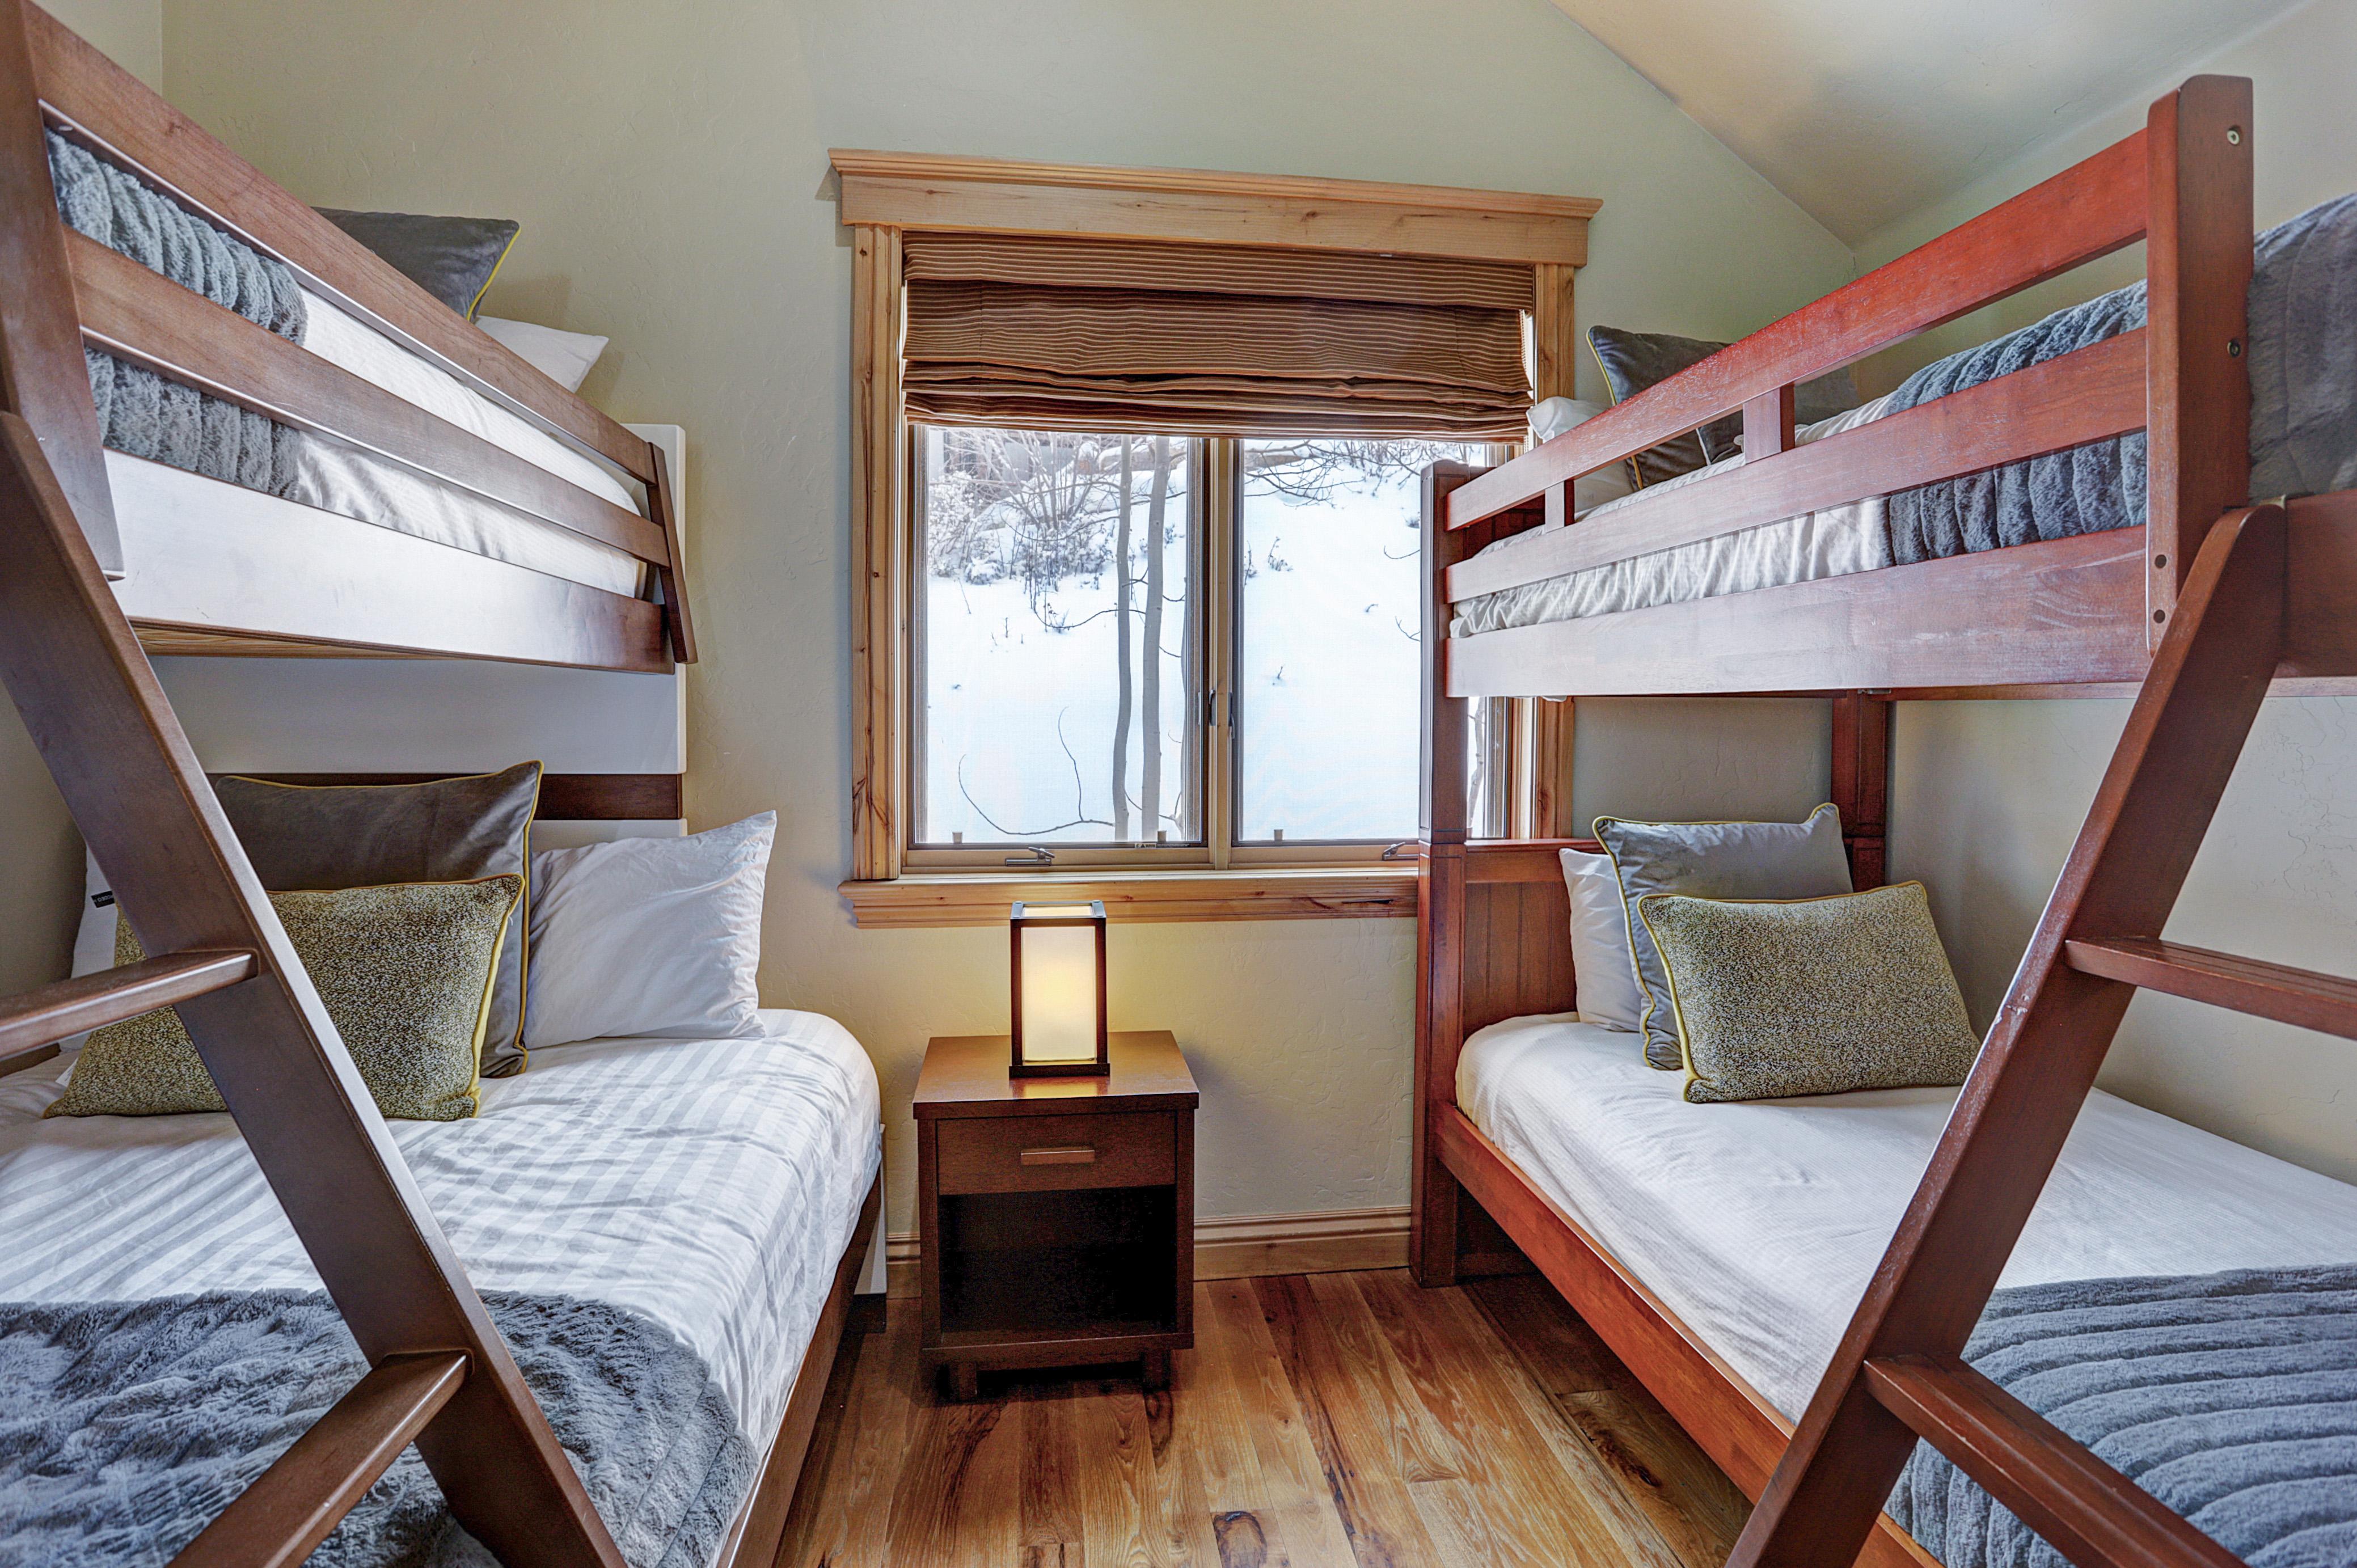 Additional view of upper level bunk room with private bath